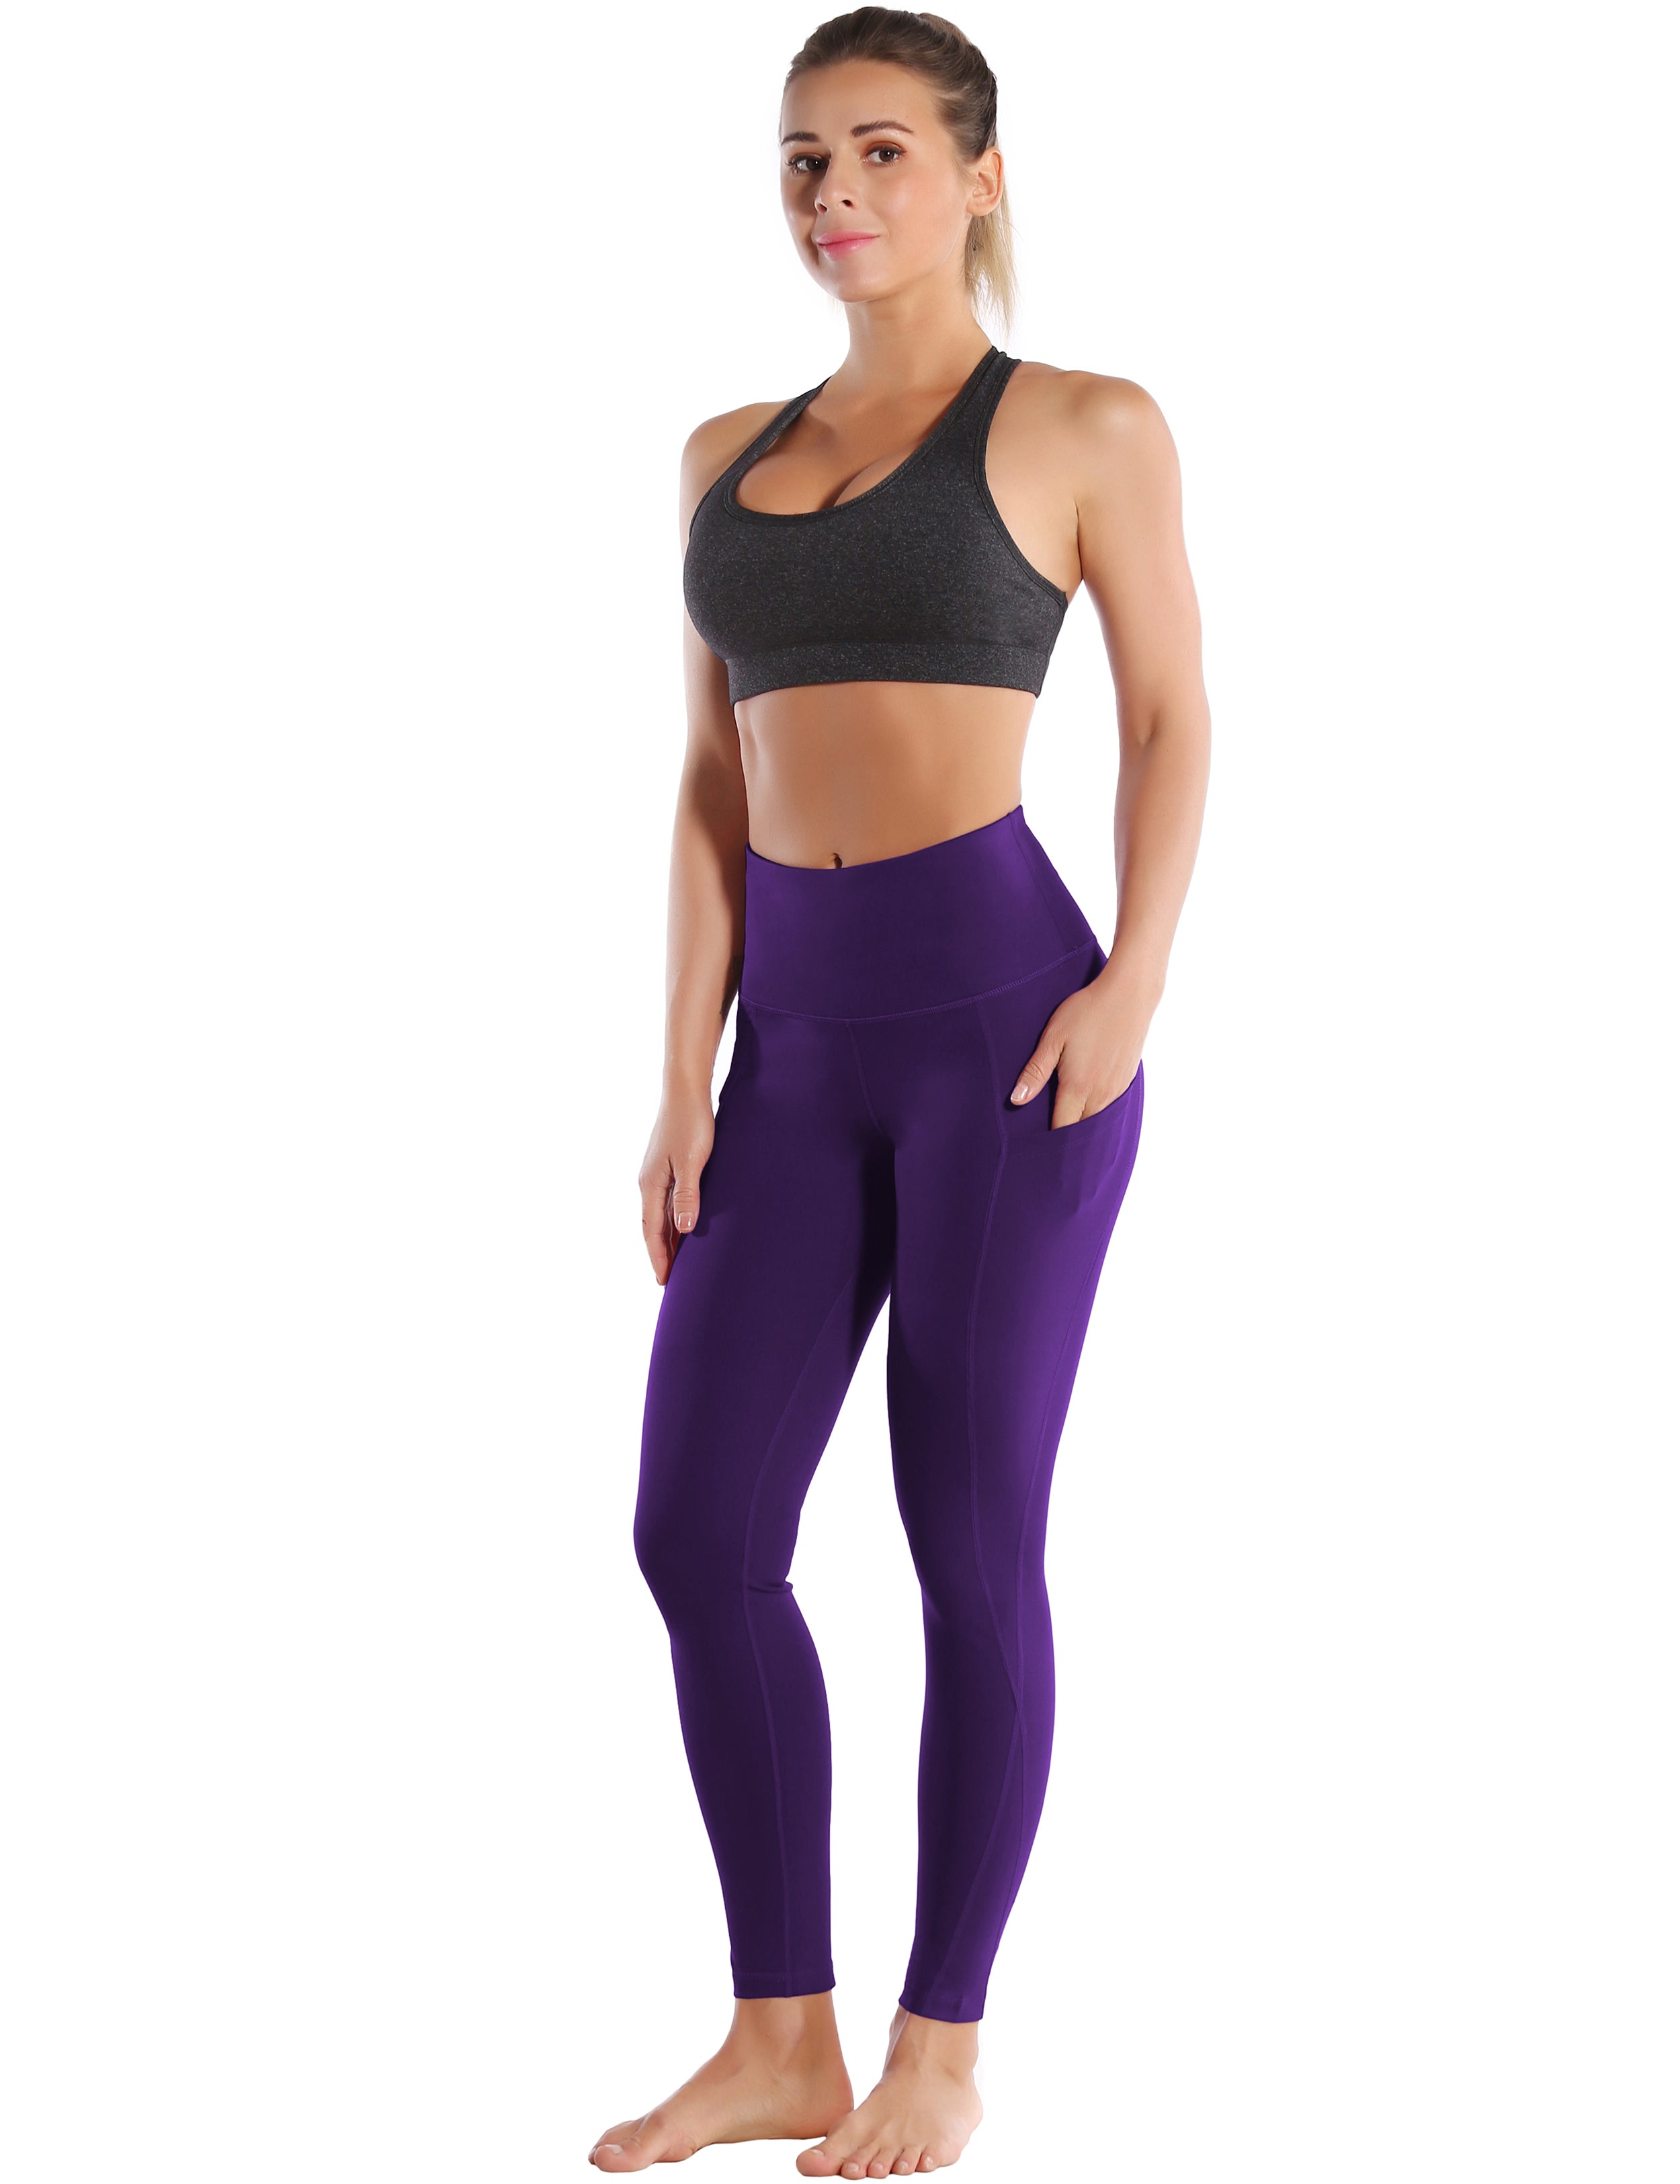 High Waist Side Pockets Yoga Pants grapevine 75% Nylon, 25% Spandex Fabric doesn't attract lint easily 4-way stretch No see-through Moisture-wicking Tummy control Inner pocket